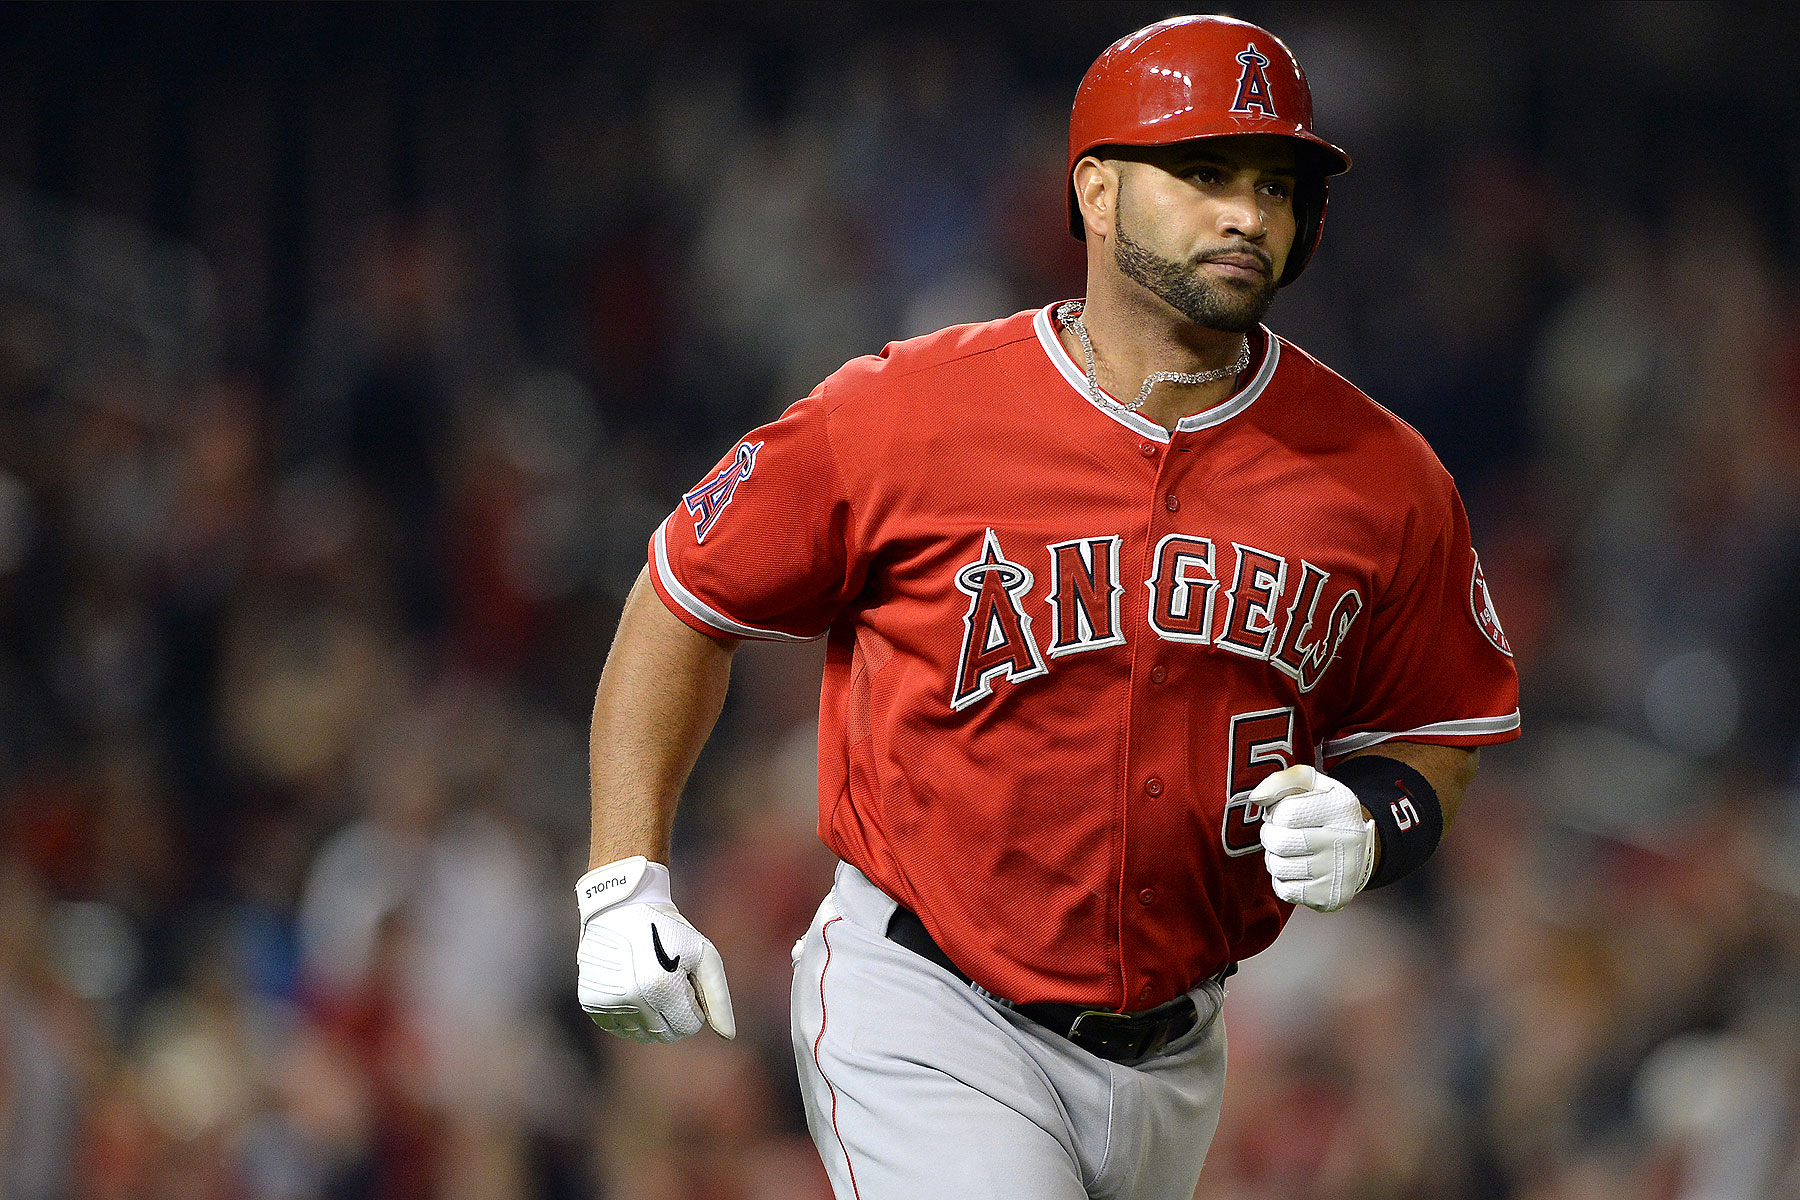 MLB: Albert Pujols Enters 500 Home Run Club During Win Over Nationals